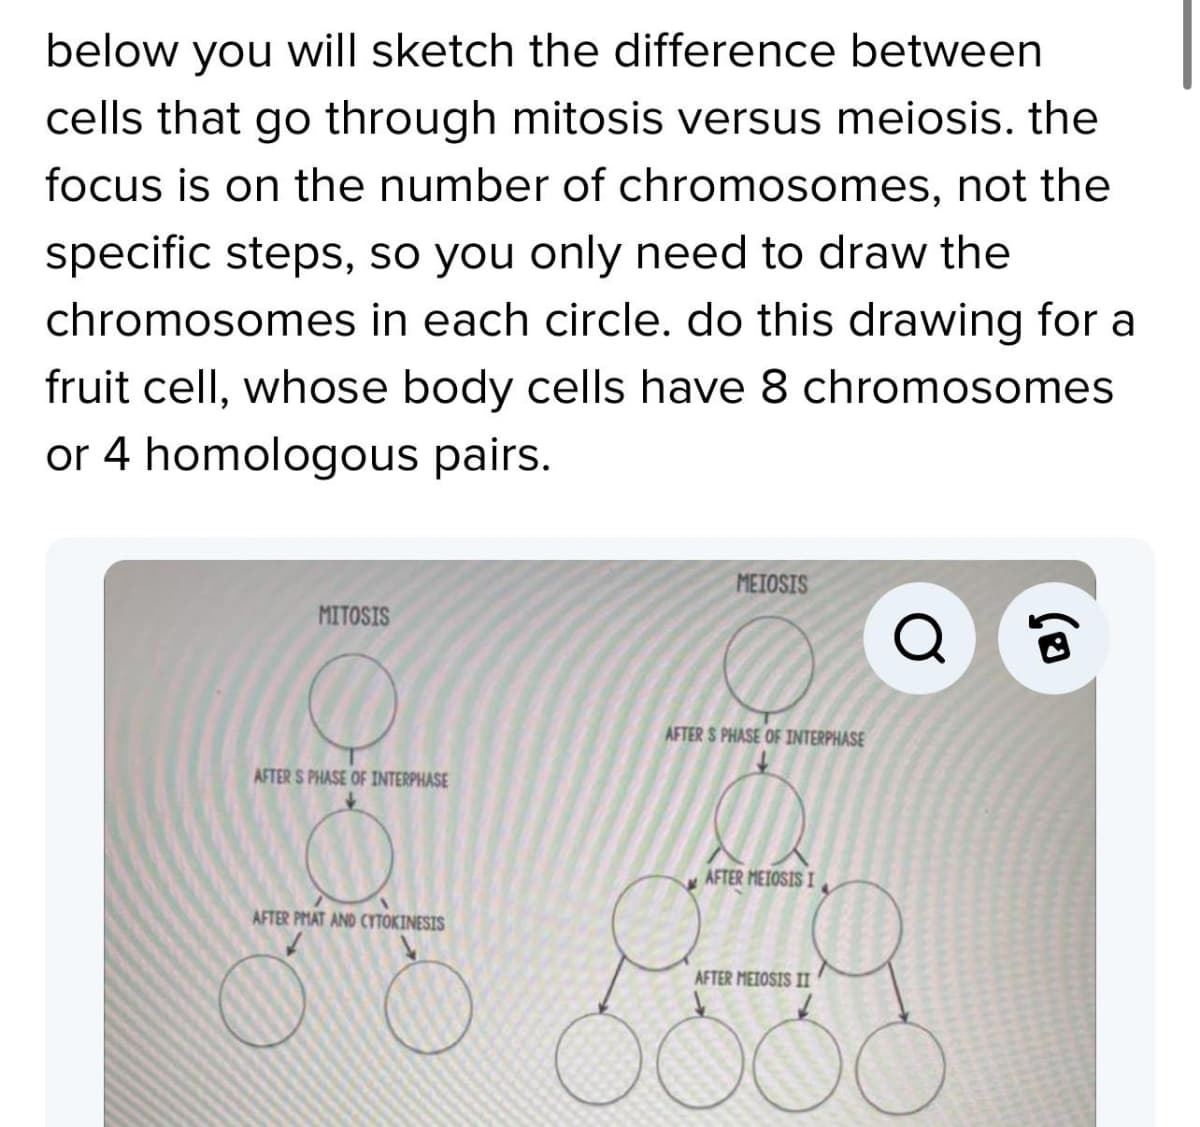 below you will sketch the difference between
cells that go through mitosis versus meiosis. the
focus is on the number of chromosomes, not the
specific steps, so you only need to draw the
chromosomes in each circle. do this drawing for a
fruit cell, whose body cells have 8 chromosomes
or 4 homologous pairs.
MITOSIS
11
AFTER S PHASE OF INTERPHASE
AFTER PMAT AND CYTOKINESIS
od
MEIOSIS
KO
AFTER S PHASE OF INTERPHASE
AFTER MEIOSIS I
AFTER MEIOSIS II
KA
Q
B)